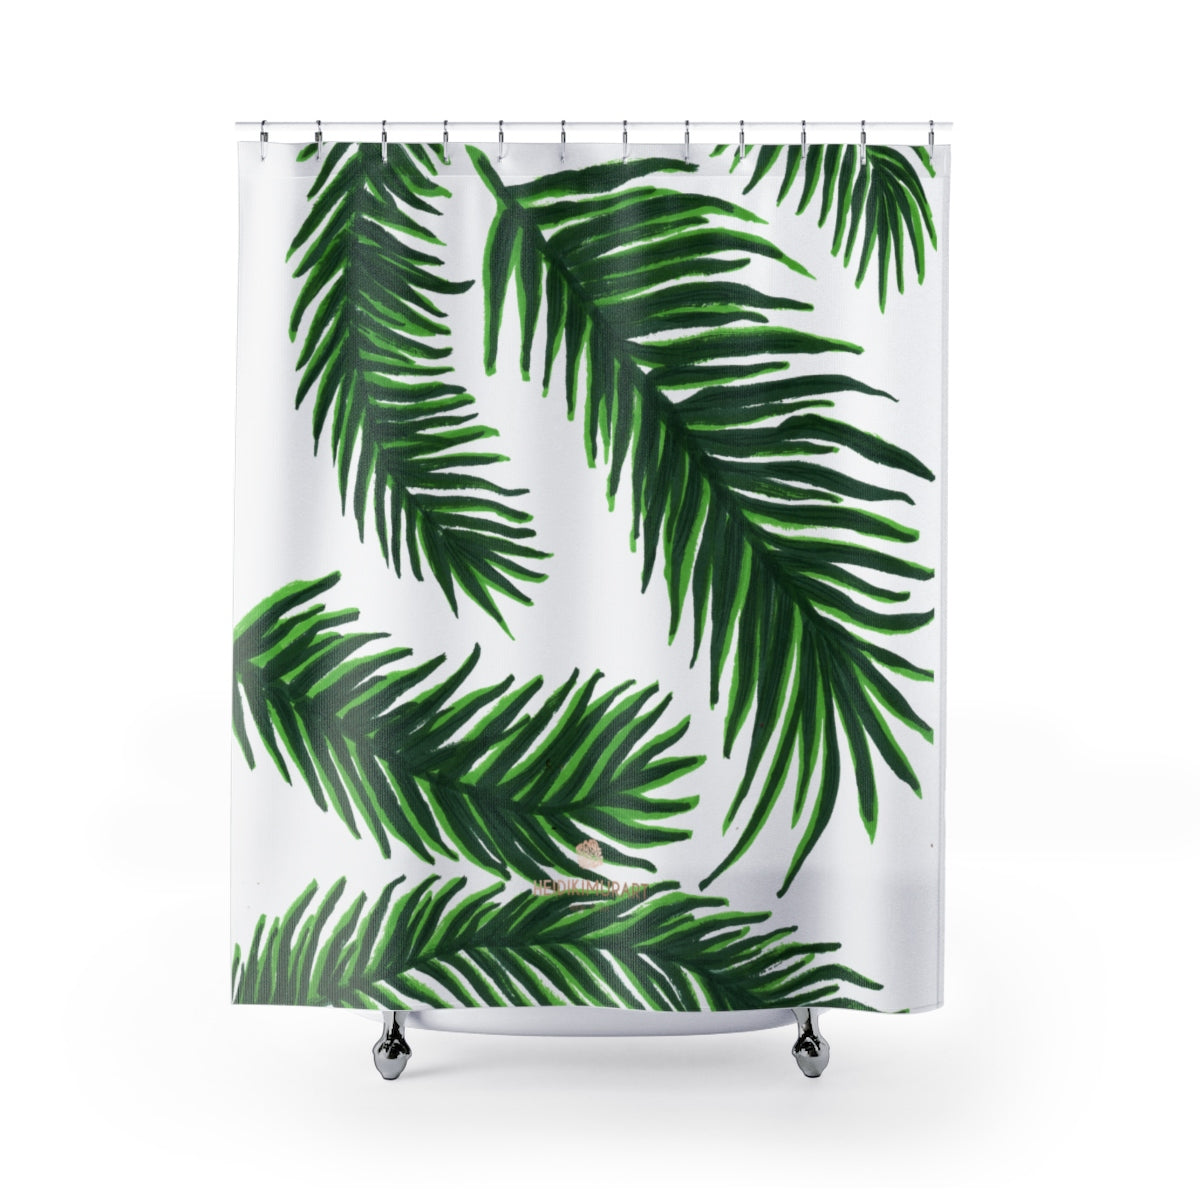 White Green Jungle Style Tropical Palm Tree Leaf Print Shower Curtains- Printed in USA-Shower Curtain-71" x 74"-Heidi Kimura Art LLC White Green Jungle Shower Curtains, Premium and Modern White and Green Tropical Tree Palm Leaf Print Designer Shower Curtains - Printed in USA, Premium Bathroom Shower Curtains, Home Decor, Large 100% Polyester 71x74 inches Shower Curtains, Bathroom Shower Curtains, Jungle Hawaiian Summer Nature Print